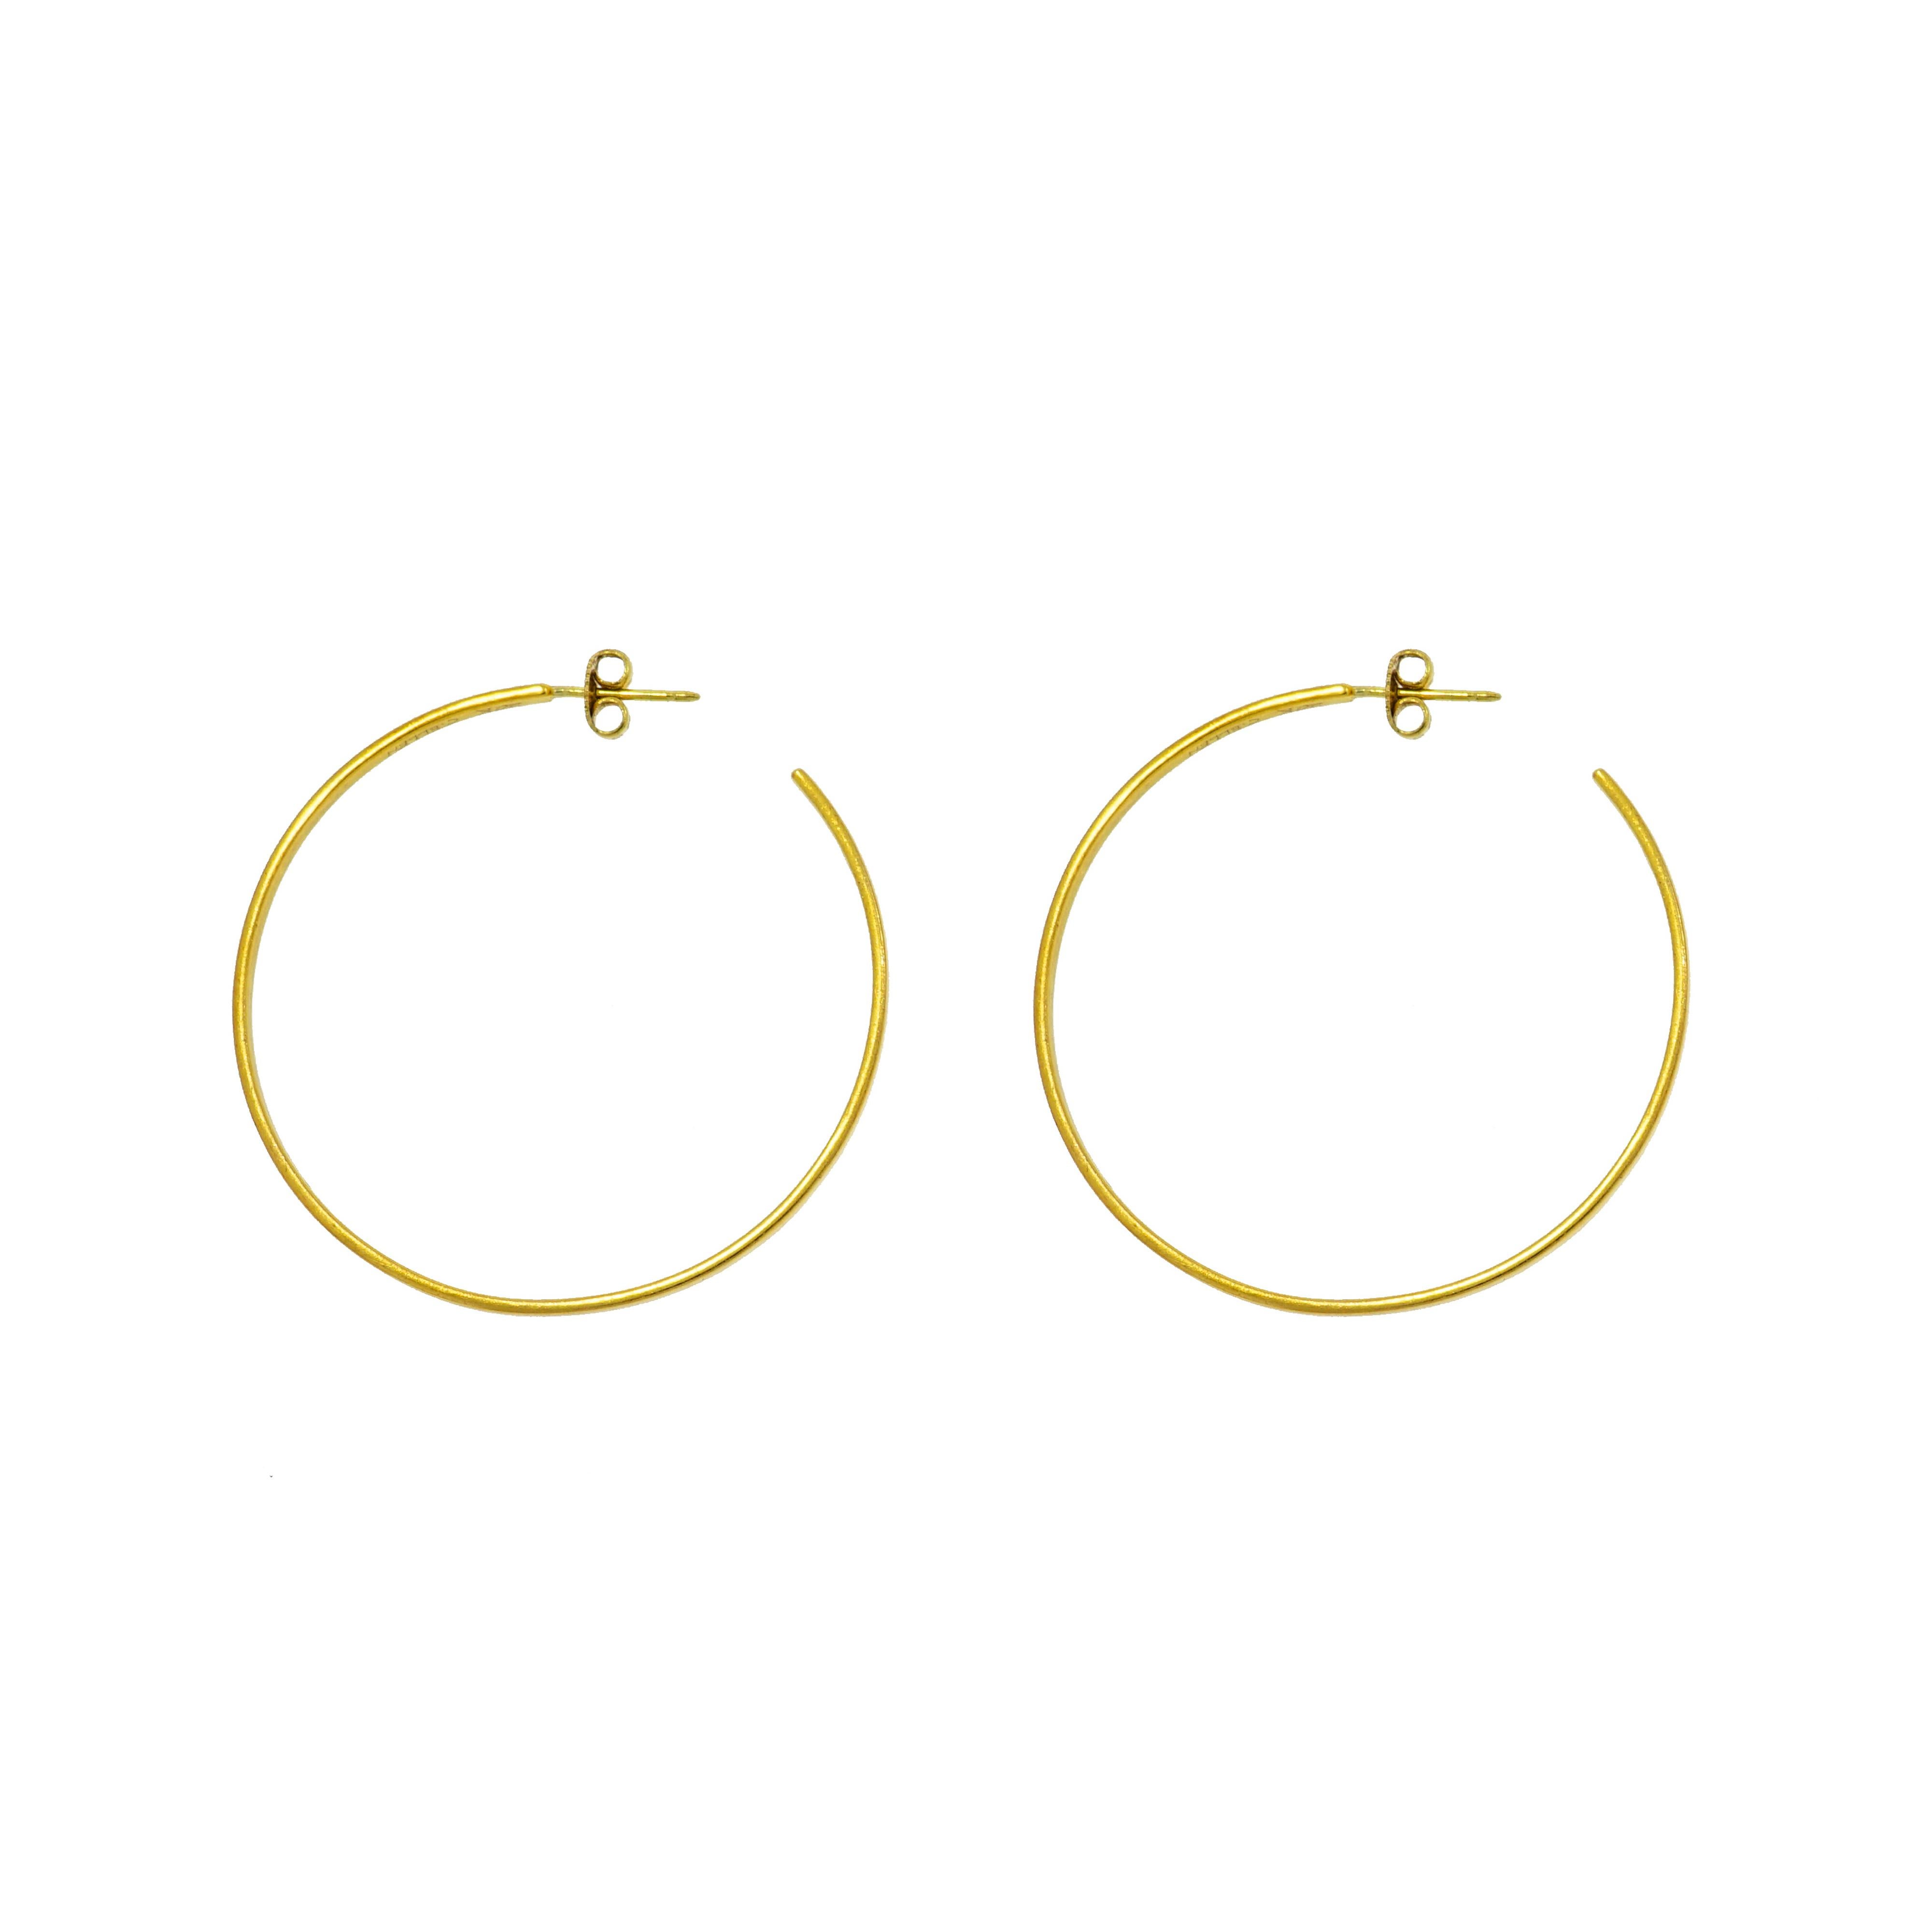 This Caroline Ellen's Hoop Earrings are inspired by pure geometrical shapes, and by the timeless simplicity of ancient jewelry. She strives to create jewelry that is modern, luxurious and yet timelessly classic. Her philosophy is to find beauty in